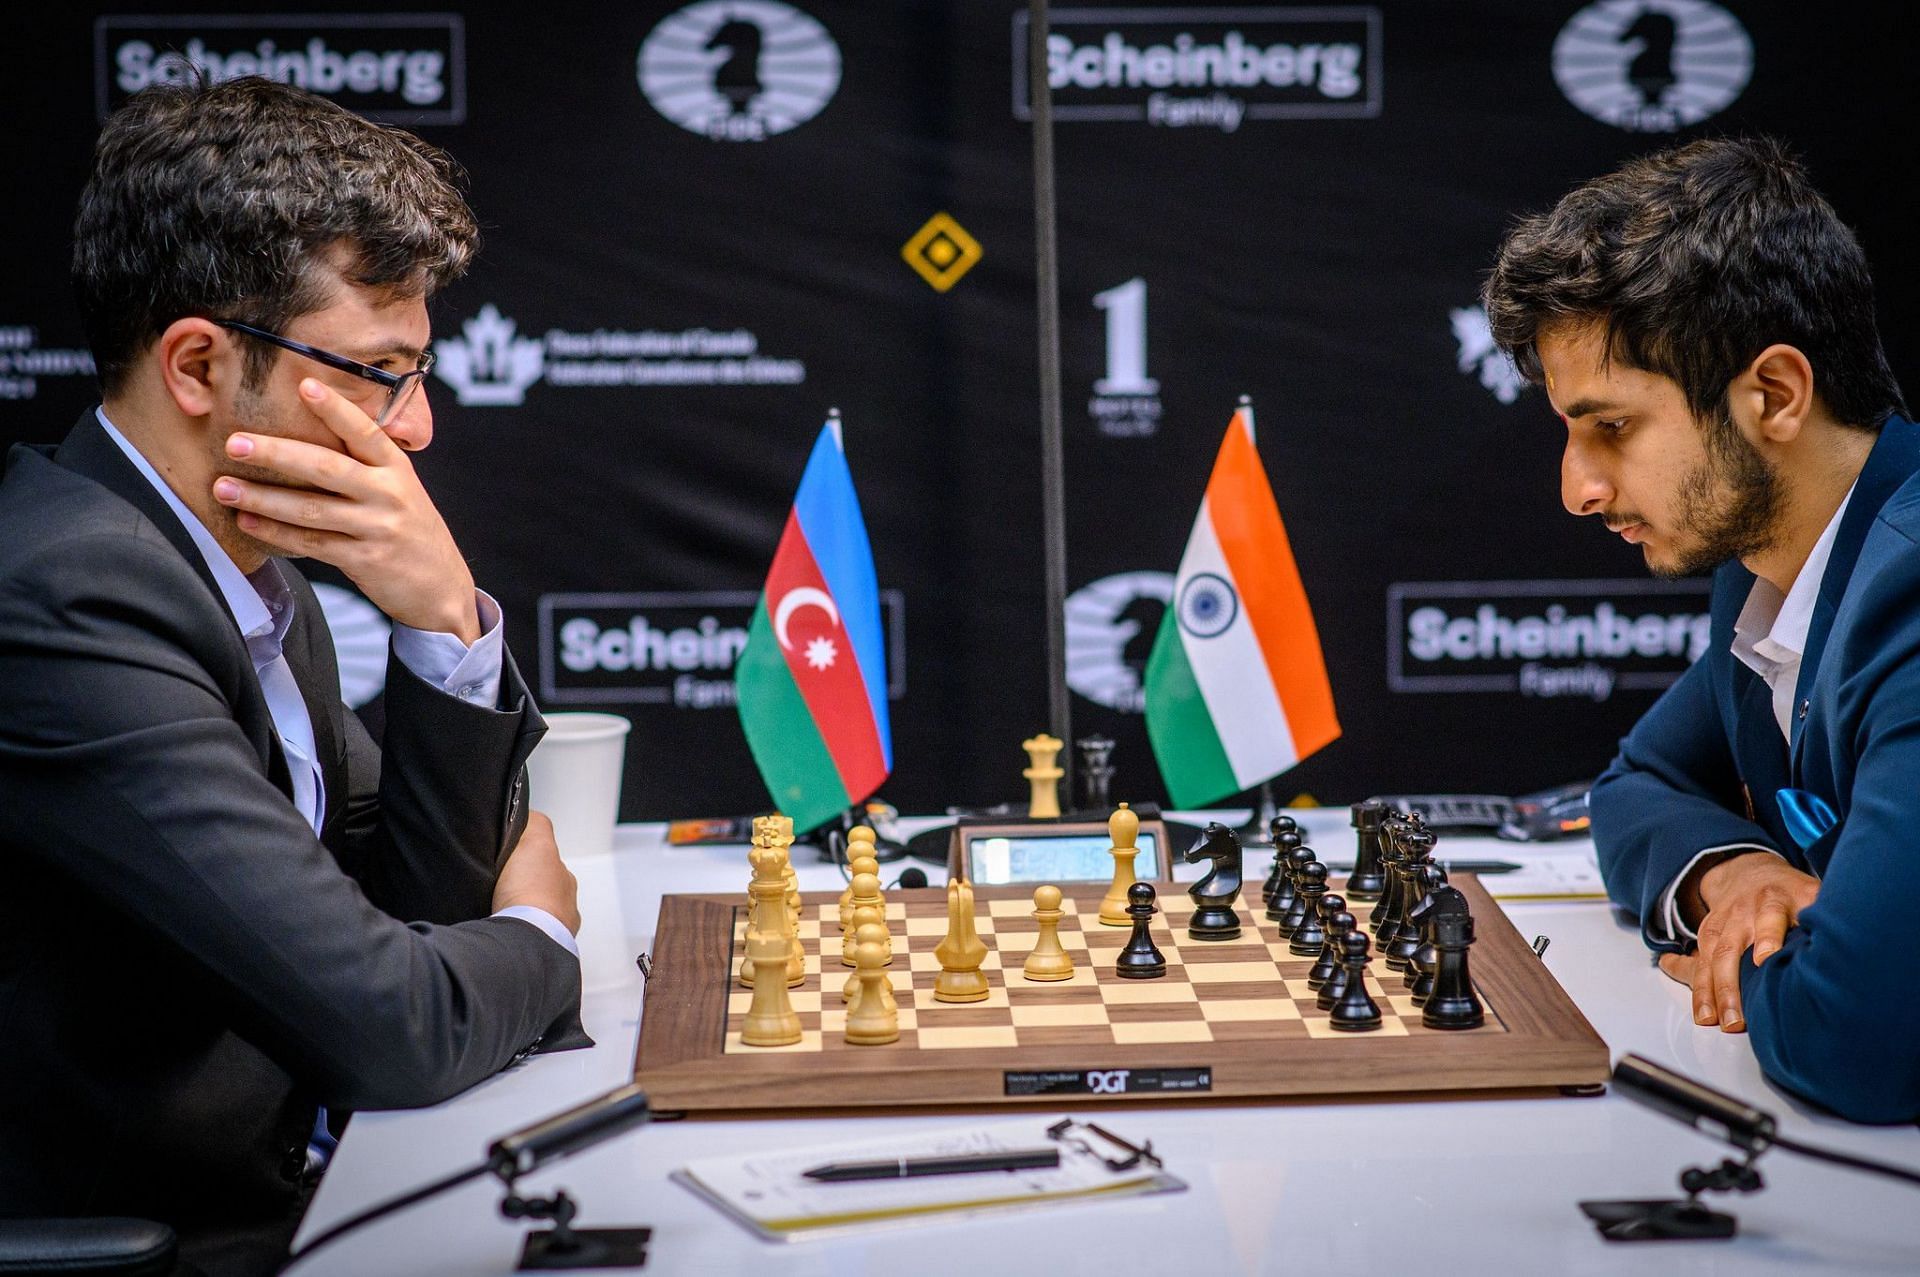 Nijat Abasov and Vidit Santosh Gujrathi settle for a draw in the Round 7.